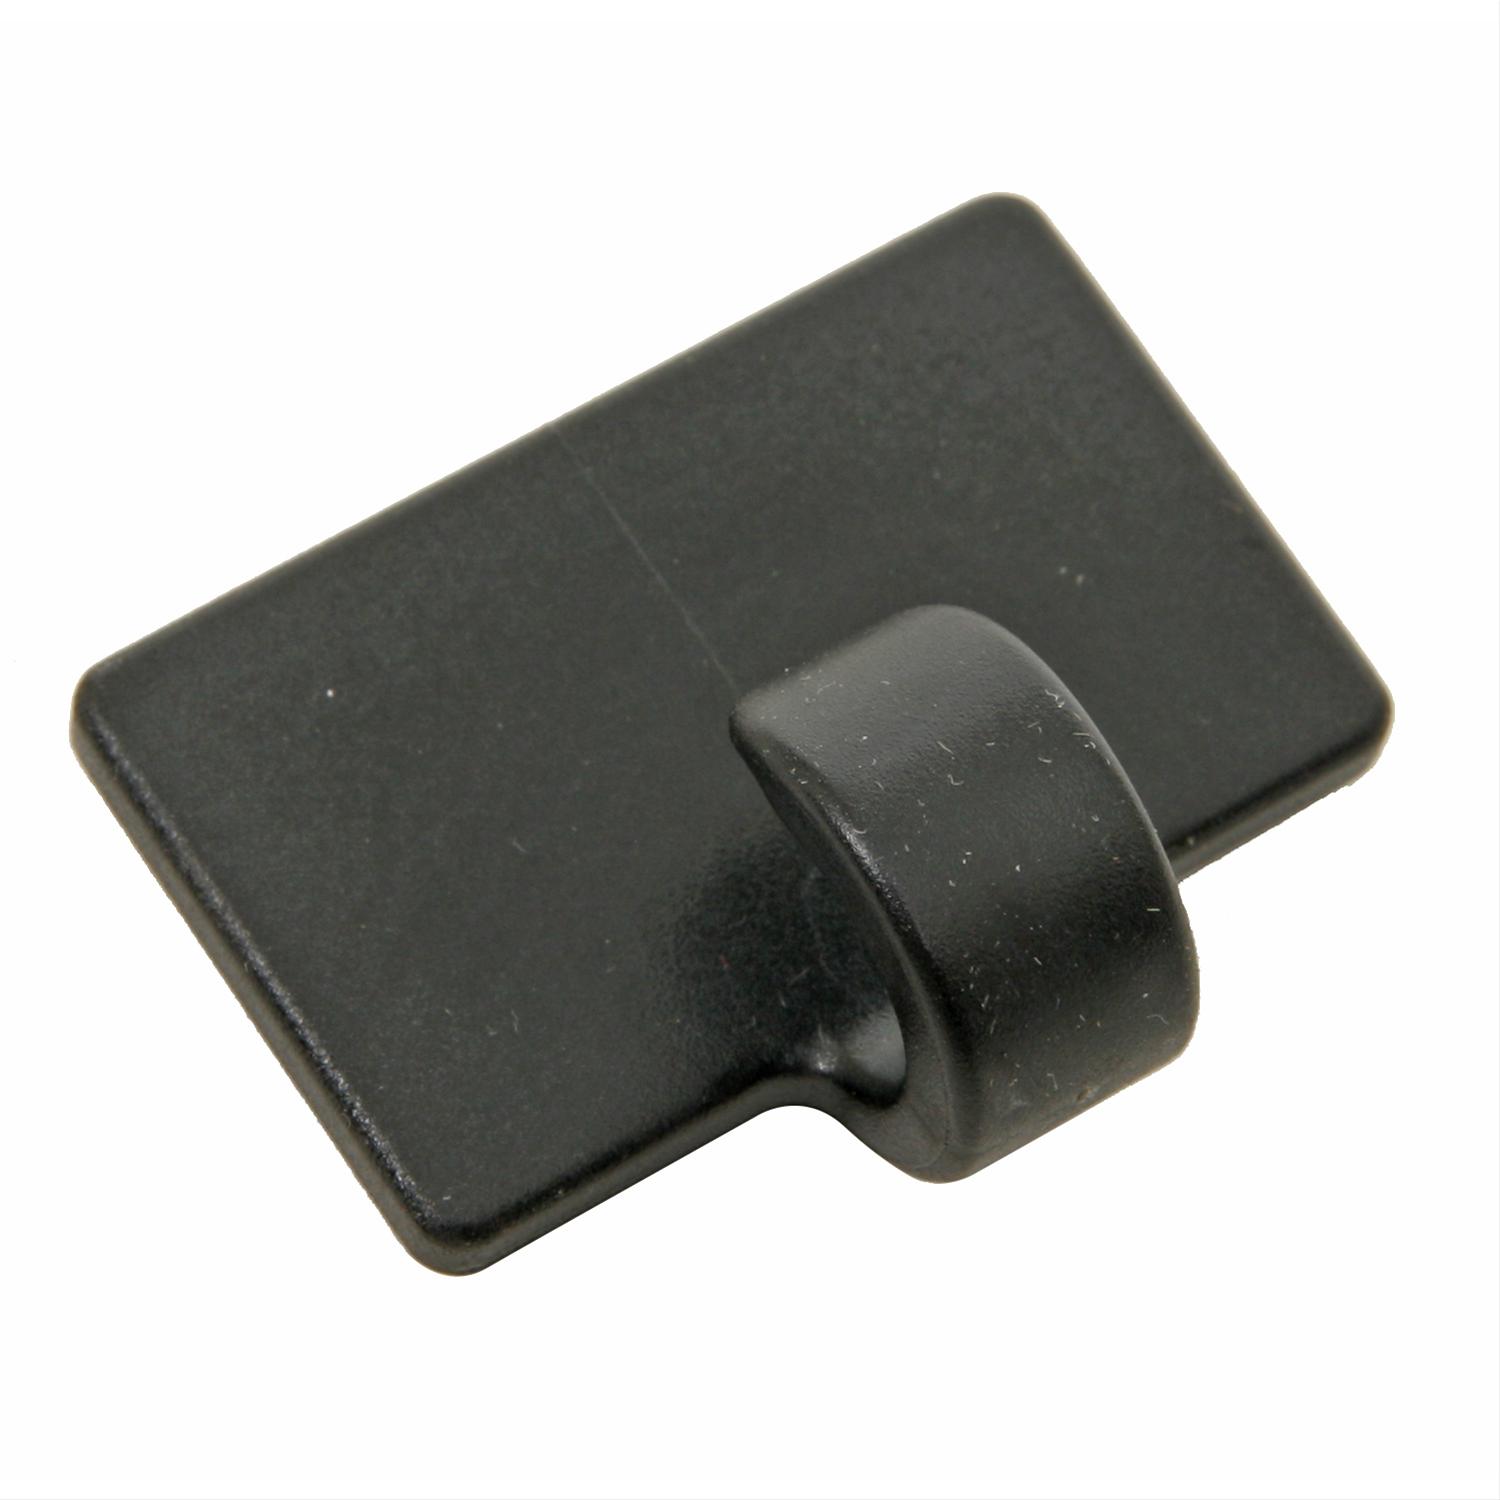 Lido Products LM-1201 Adhesive Back Hook for ICOM Type Microphones